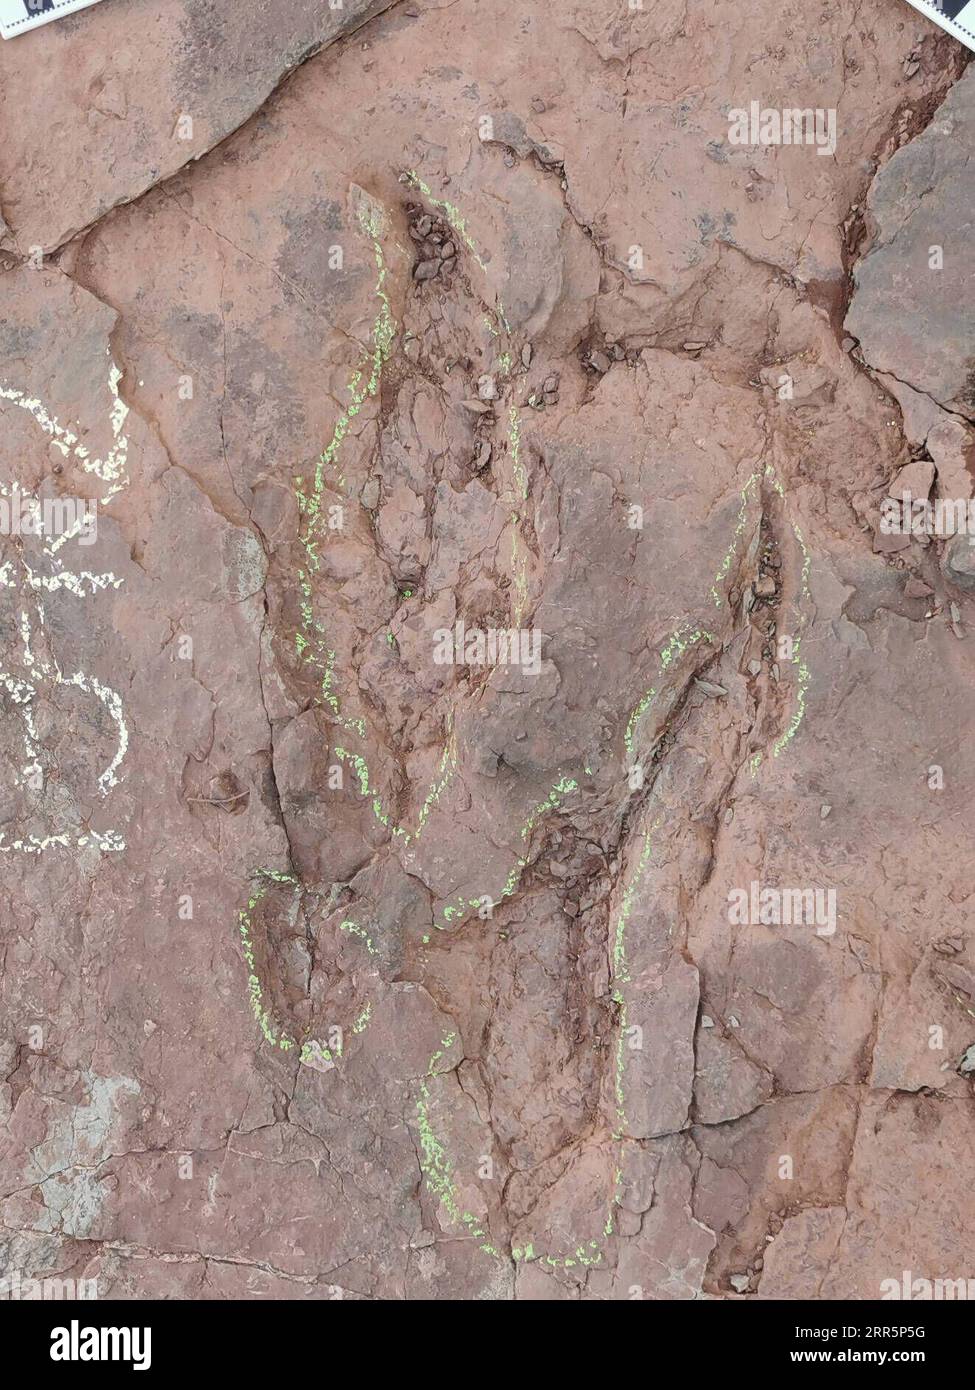 210112 -- FUZHOU, Jan. 12, 2021  -- A dinosaur footprint is seen at Longxiang Village, Lincheng Township, Shanghang County, Longyan City of southeast China s Fujian Province, Nov. 10, 2020. A team of Chinese paleontologists has identified more than 240 fossilized dinosaur footprints in east China s Fujian, the first traces of dinosaur activity found in the province. The dinosaur track site in Shanghang County, covering an area of about 1,600 square meters, is the largest and the most diverse such site discovered in China dating back to the Upper Cretaceous period, according to scientists. The Stock Photo